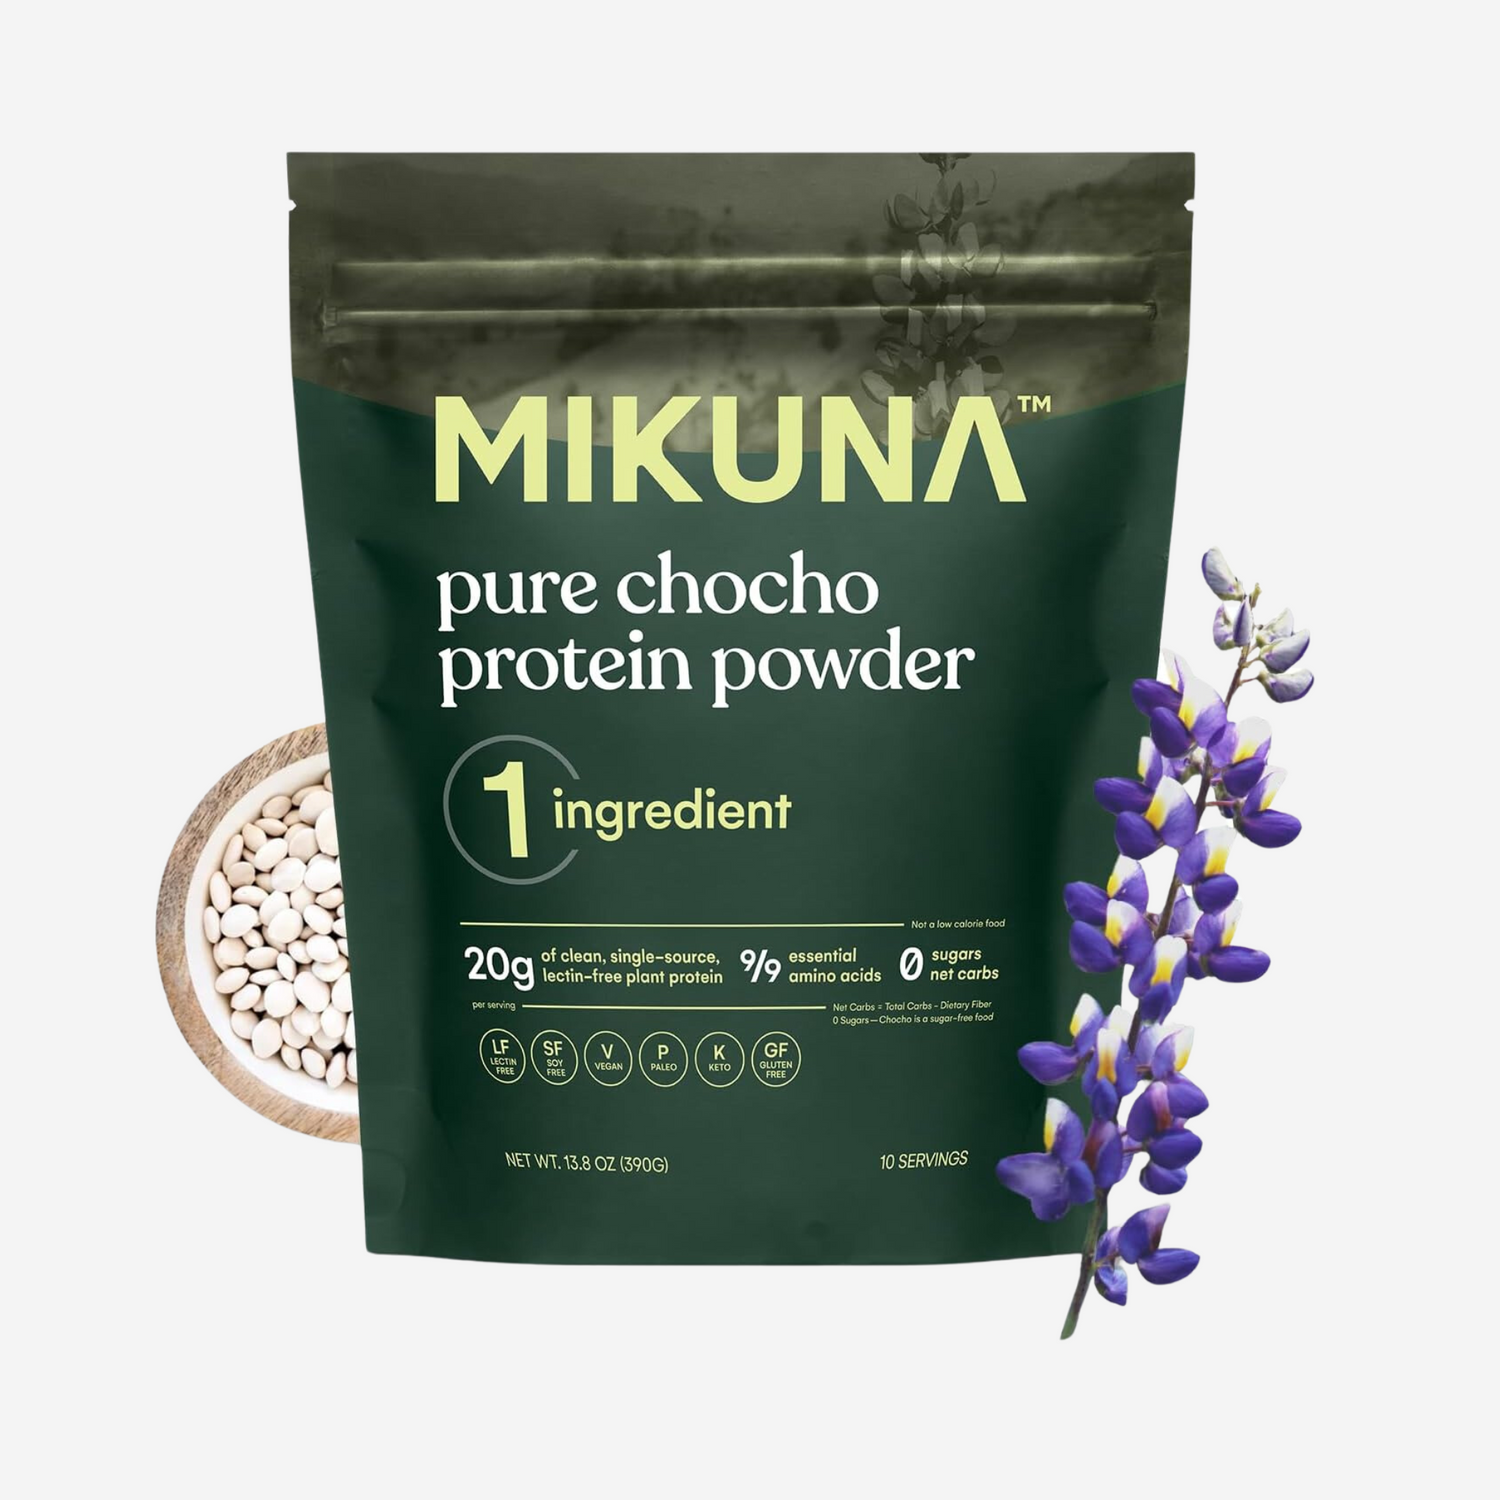 Mikuna Vegan Protein Powder (Unflavored, 10 Servings) - Plant Based Chocho Superfood Protein - Dairy Free Protein Powder Packed with Vitamins